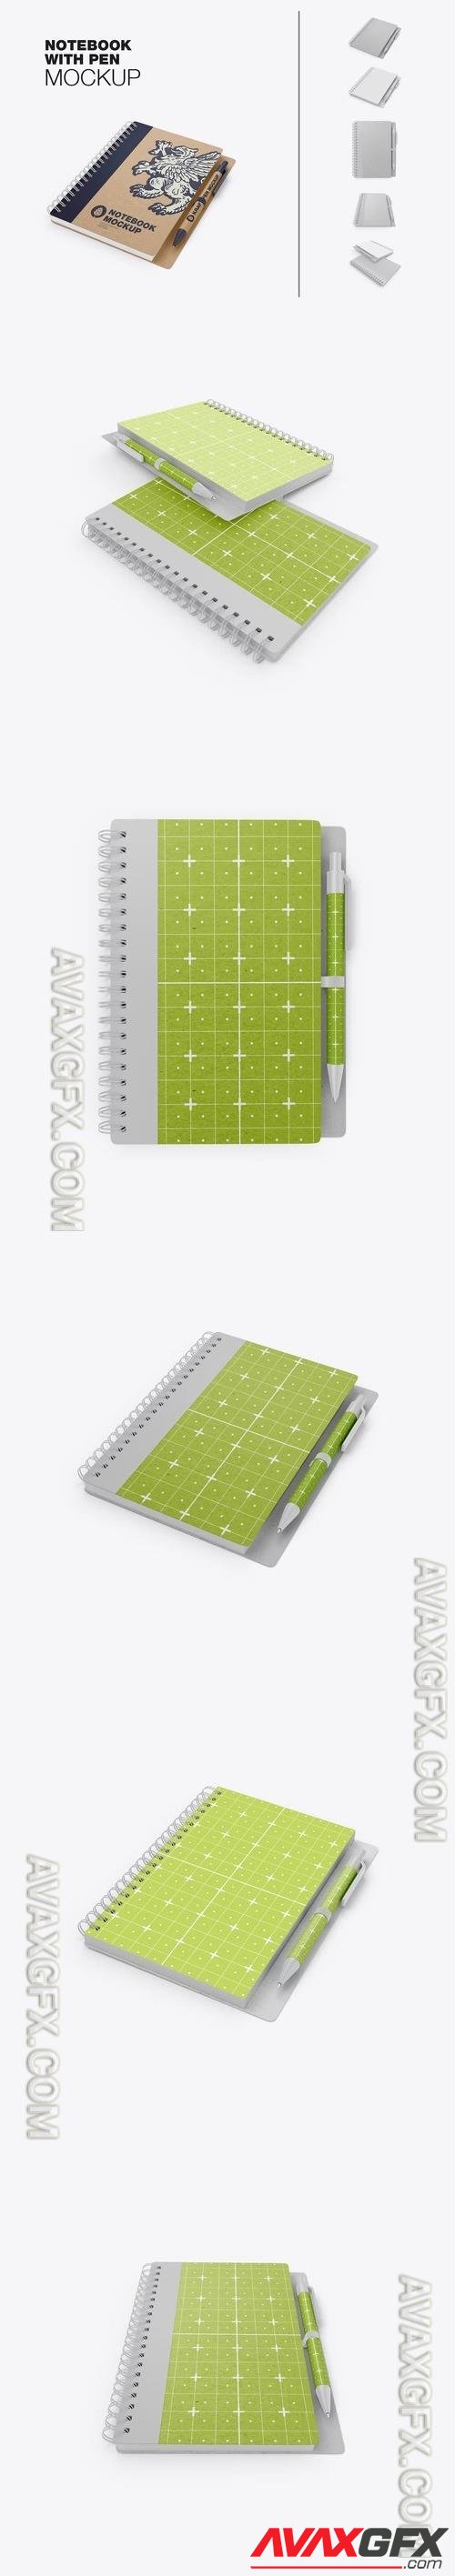 Kraft Notebook With Ring and Pen Mockup EMYS2T9